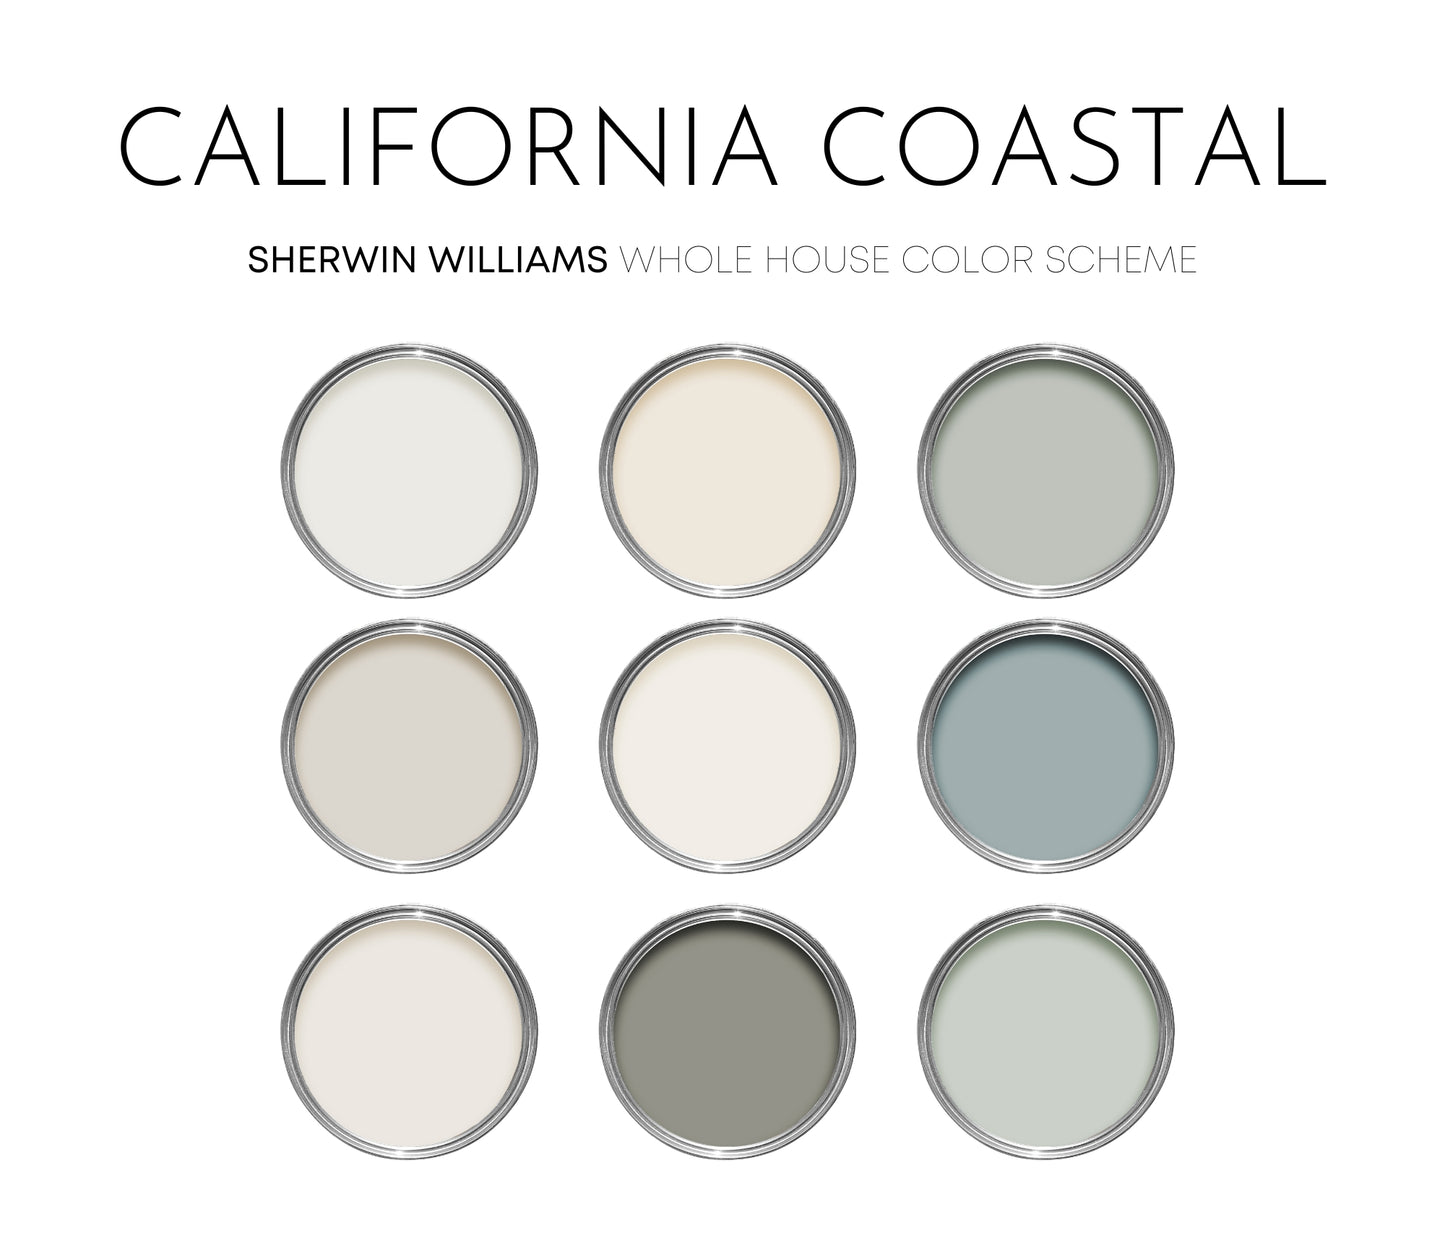 California Coastal Sherwin Williams Paint Palette - Airy Coastal, Neutral Interior Paint Colors for Home, Beach House Interior Design Color Palette, Marshmallow